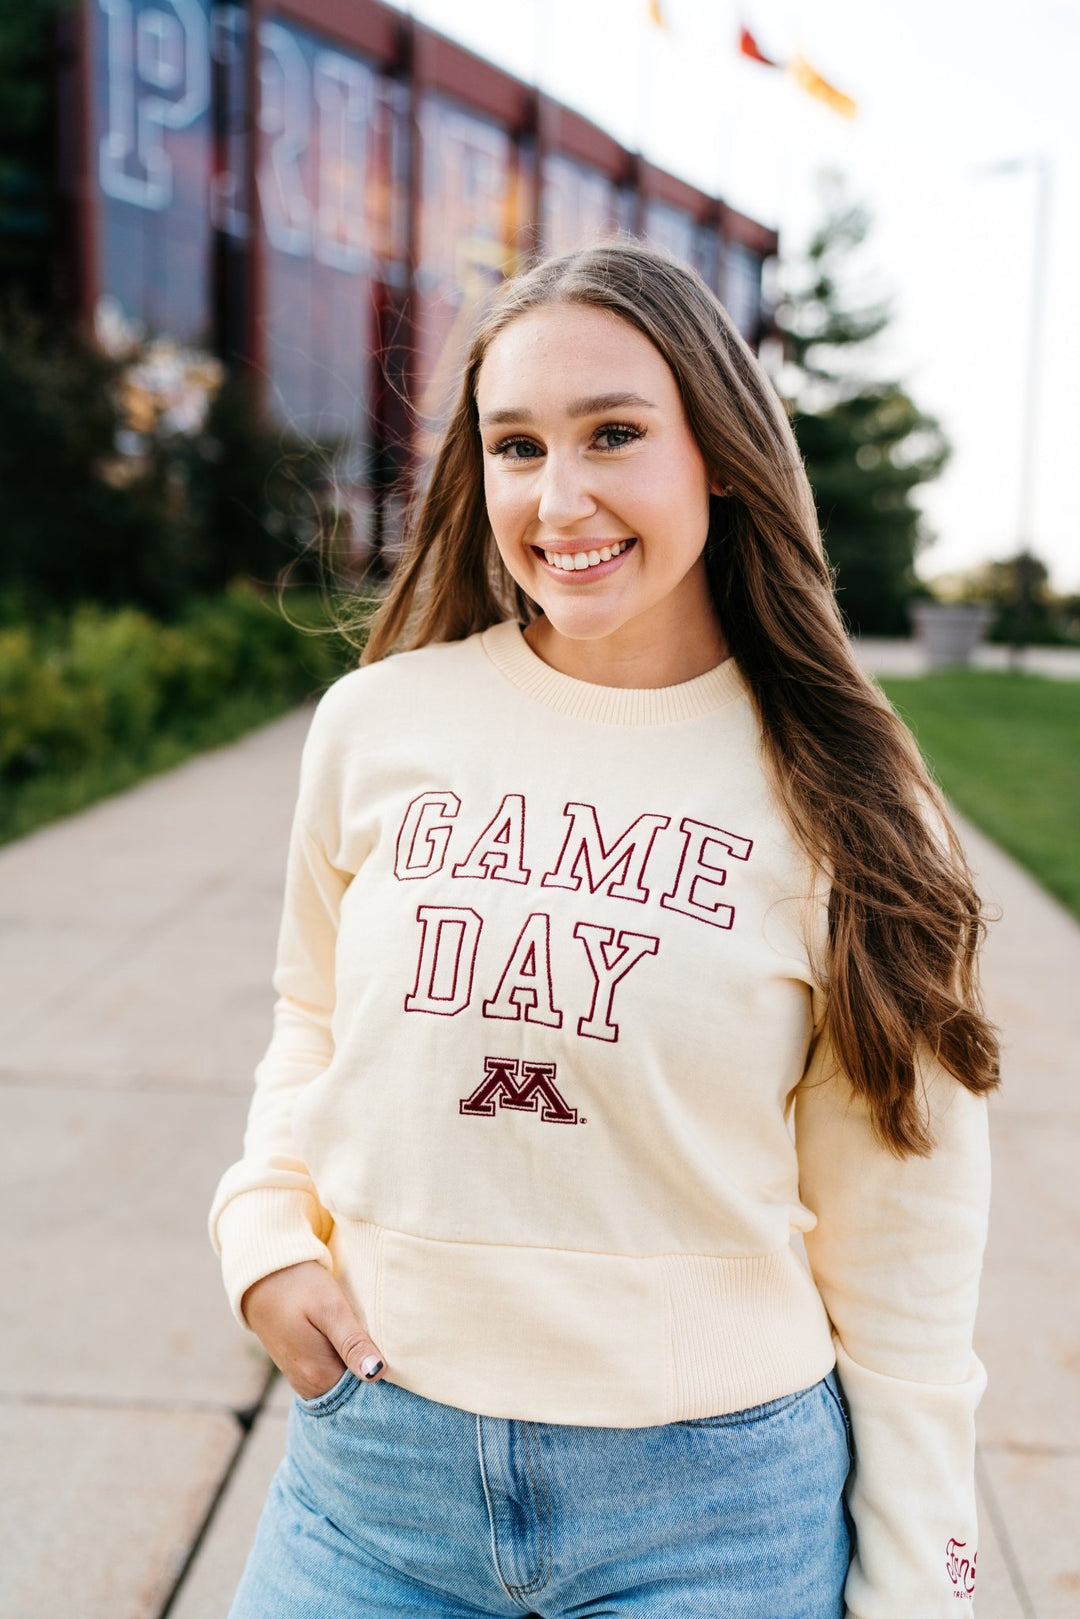 Game Day Cropped Crew - Fan Girl Clothing